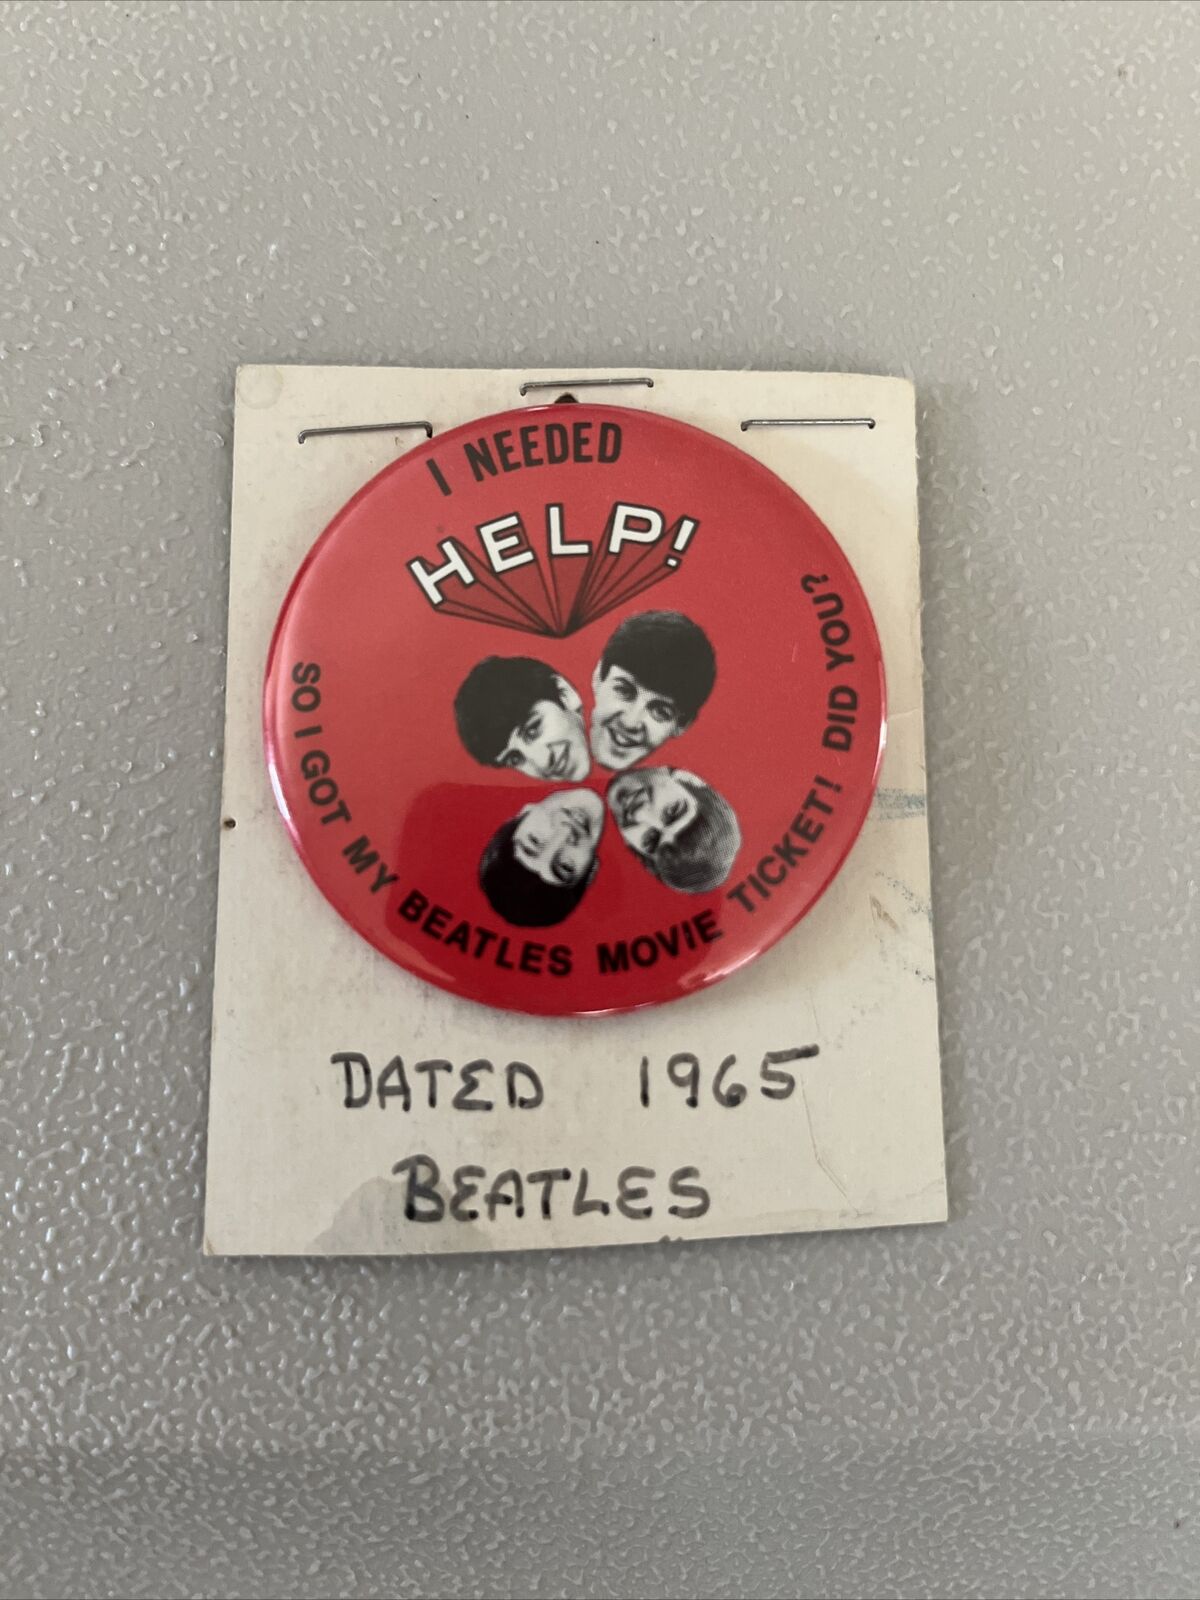 I Need Help So I Got My Beatles Movie Ticket (1965) Vintage Pin-Back Button